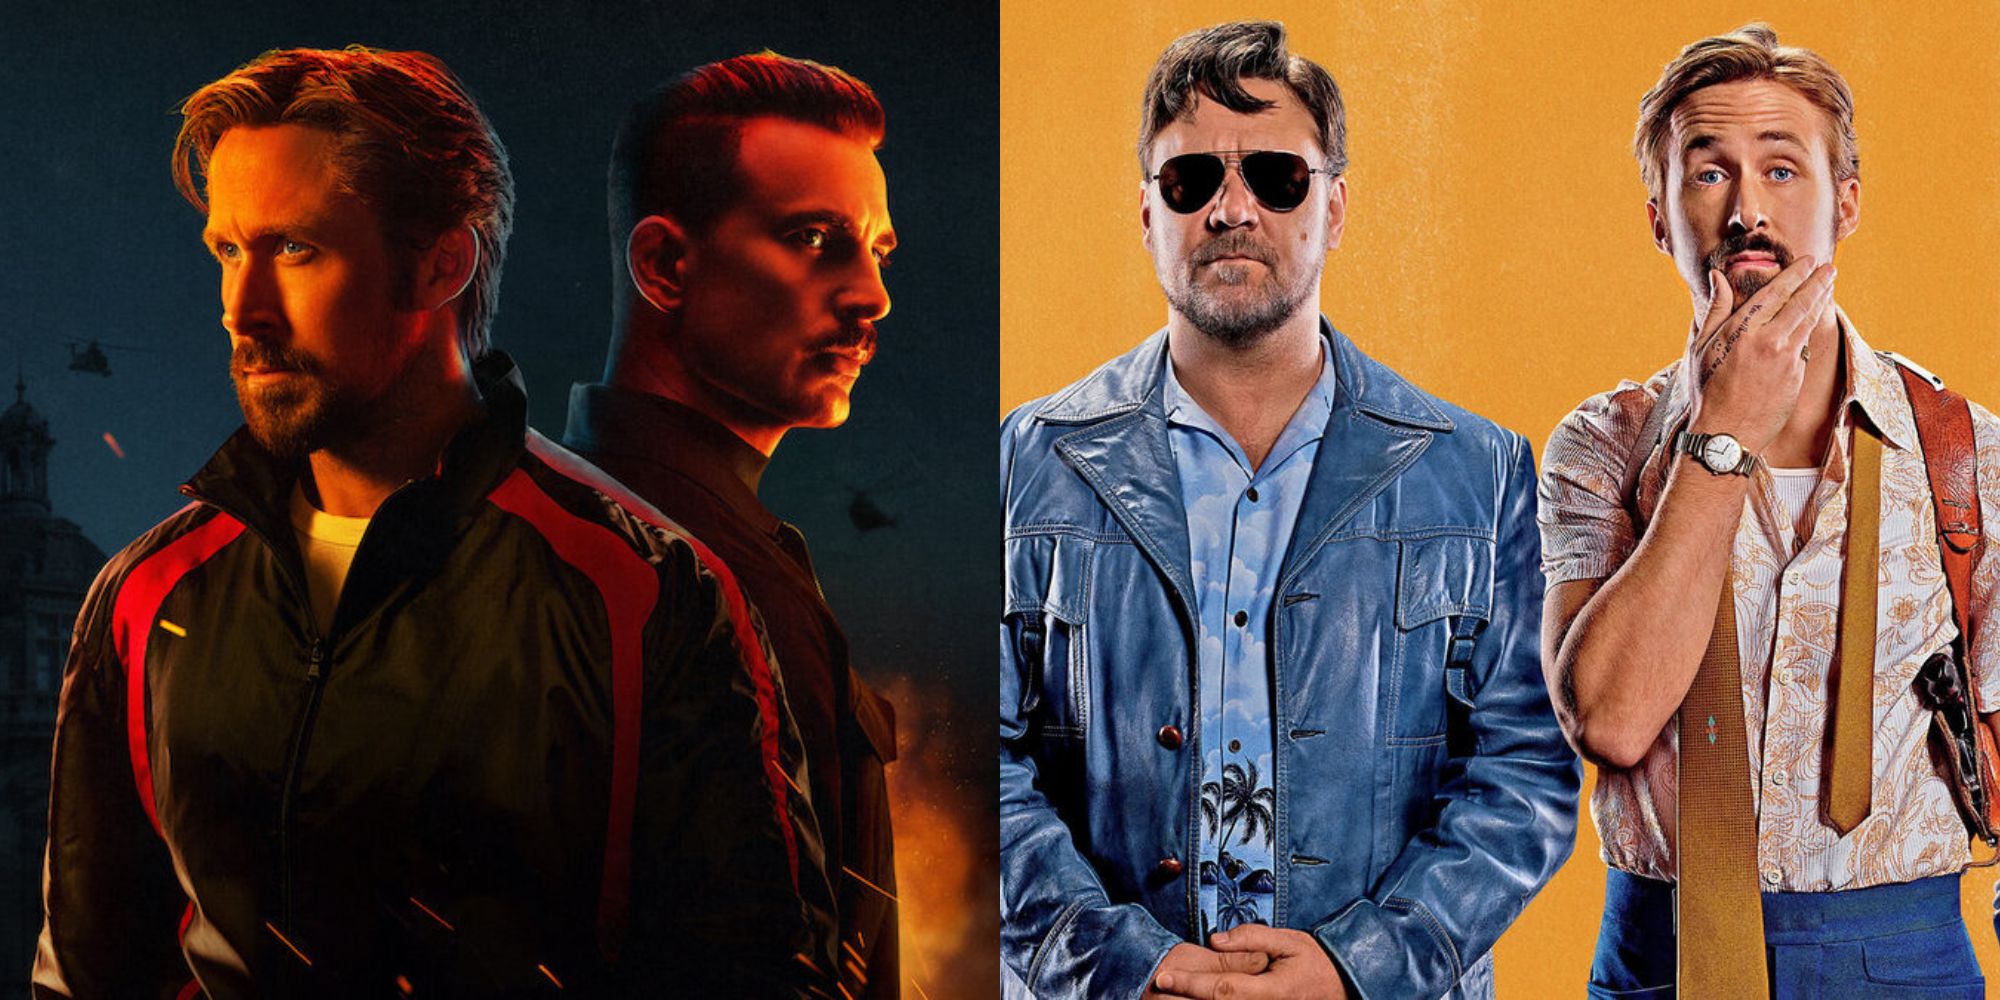 Split image showing posters for The Gray Man and The Nice Guys.